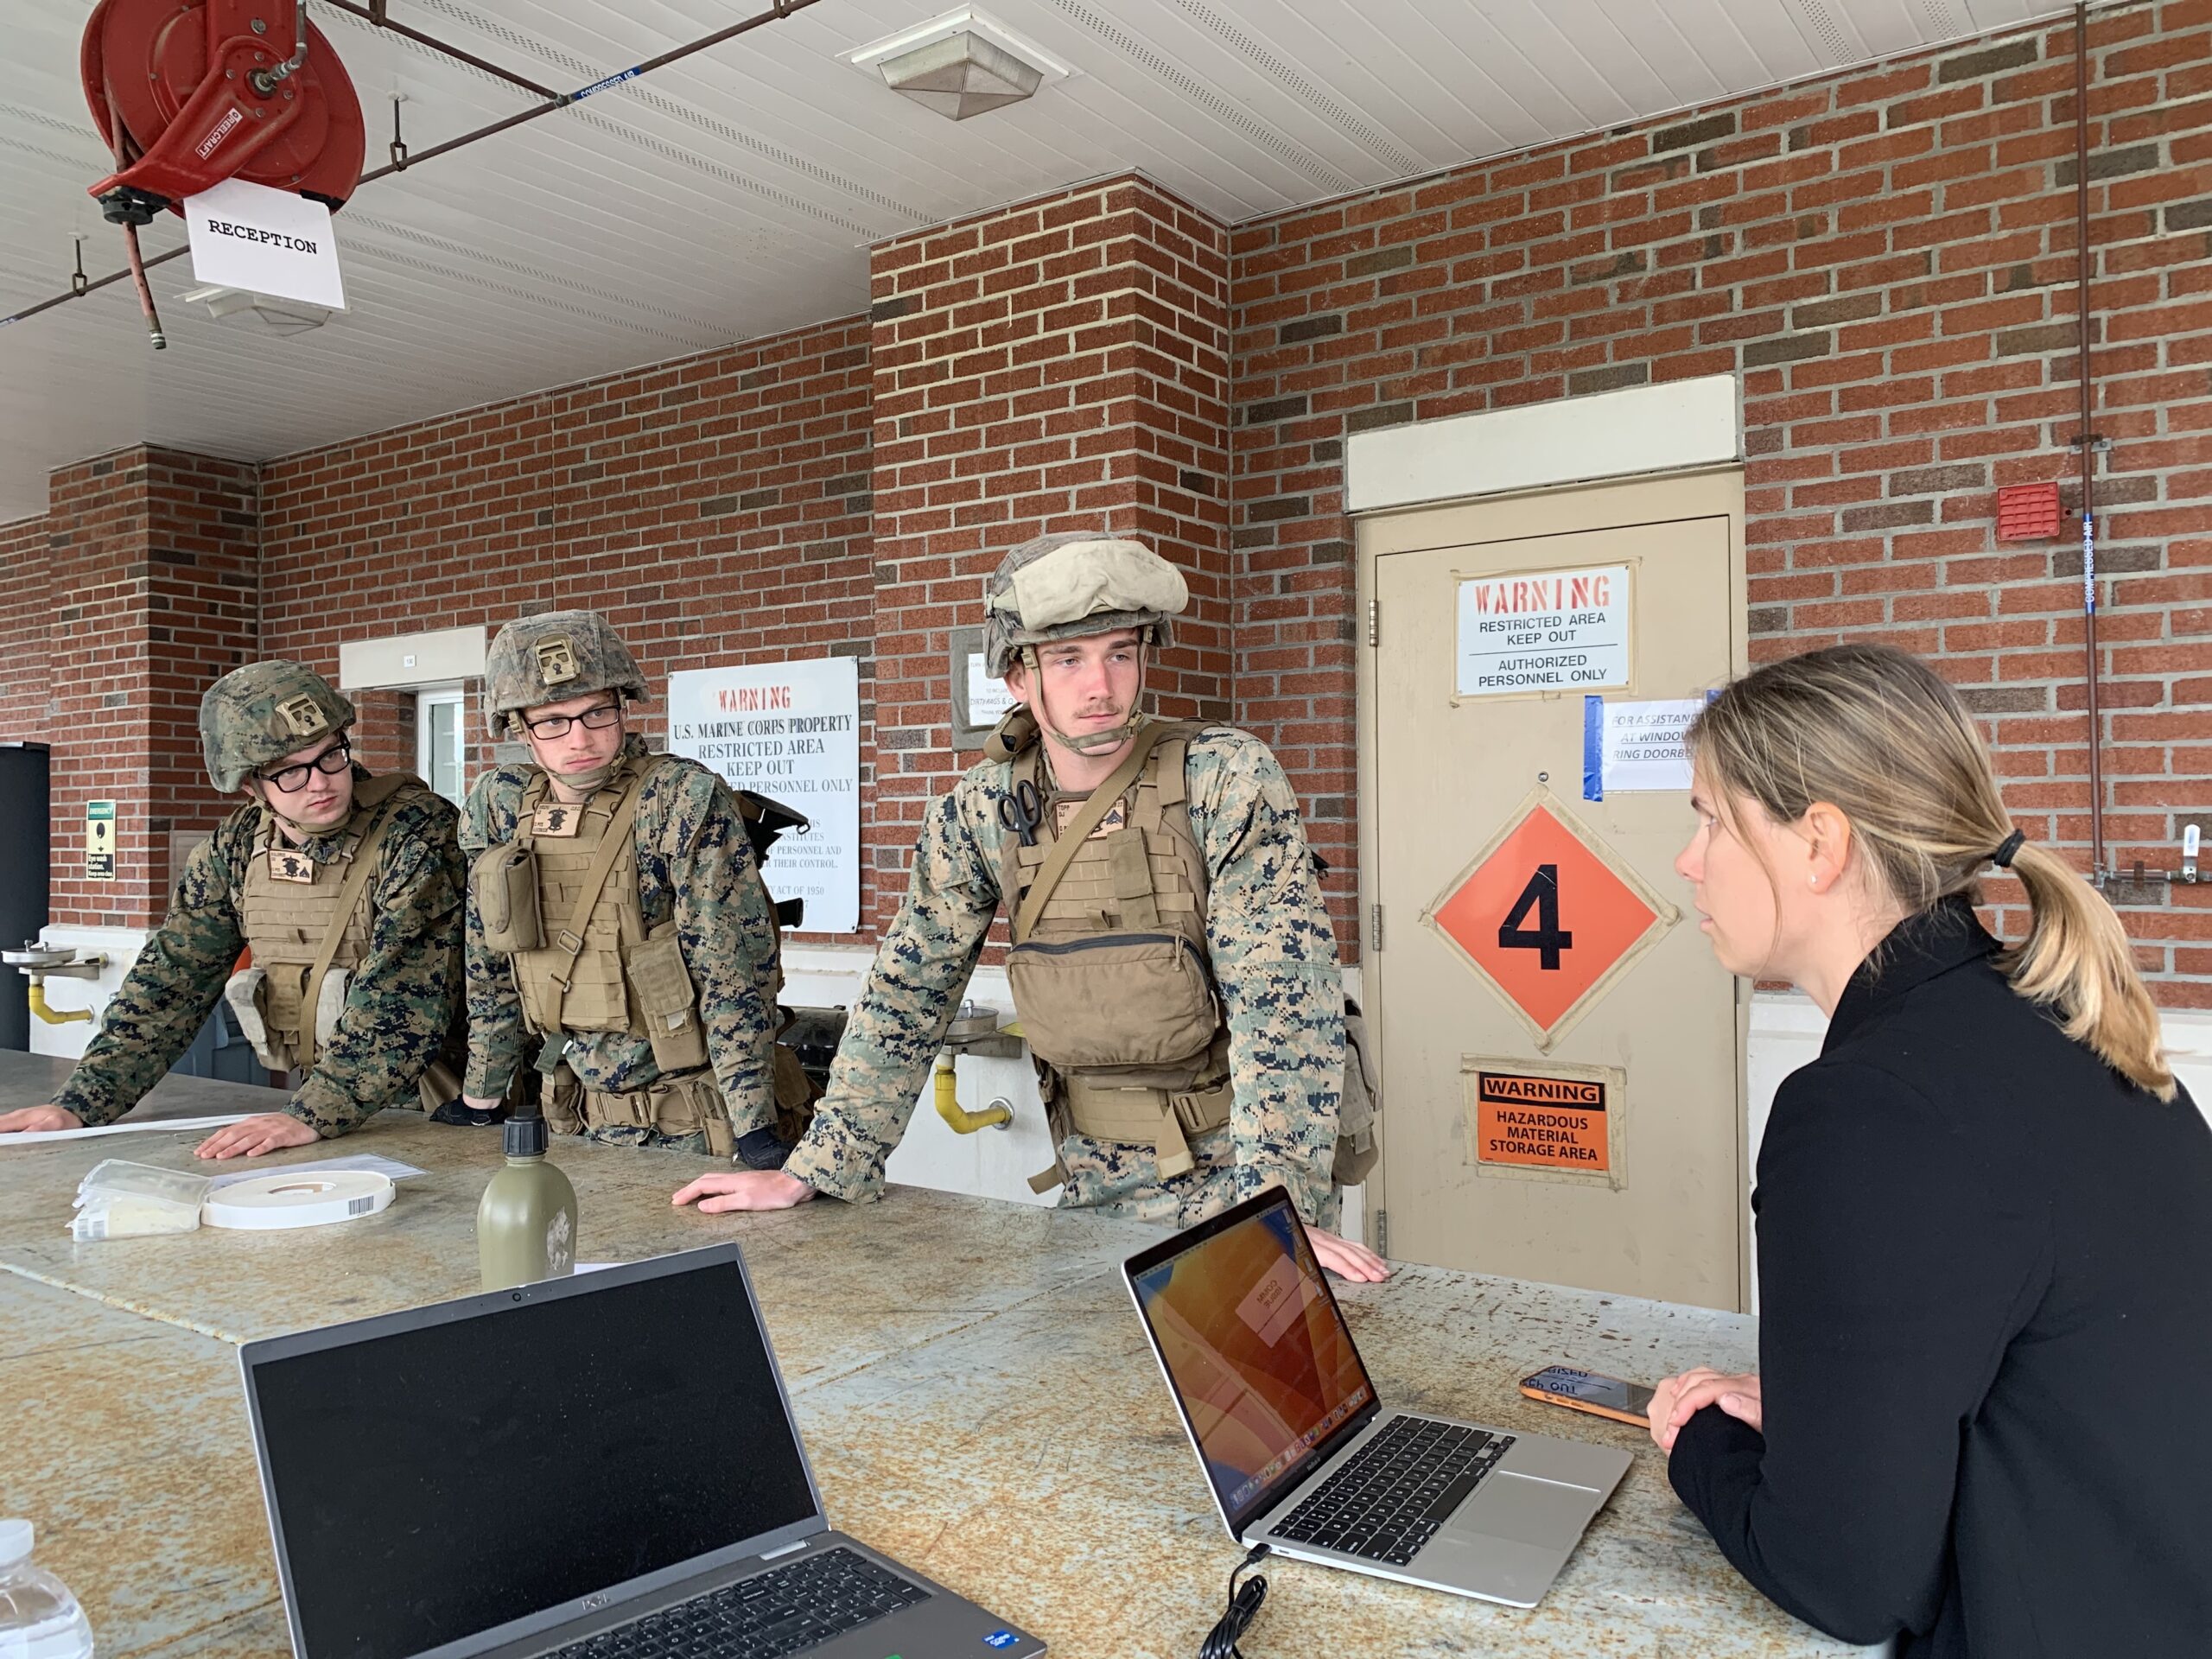    An officer from the State Department’s Bureau of Consular Affairs works with members of the 26th Marine Expeditionary Unit to establish an Evacuation Control Center for U.S. citizens during a training exercise.